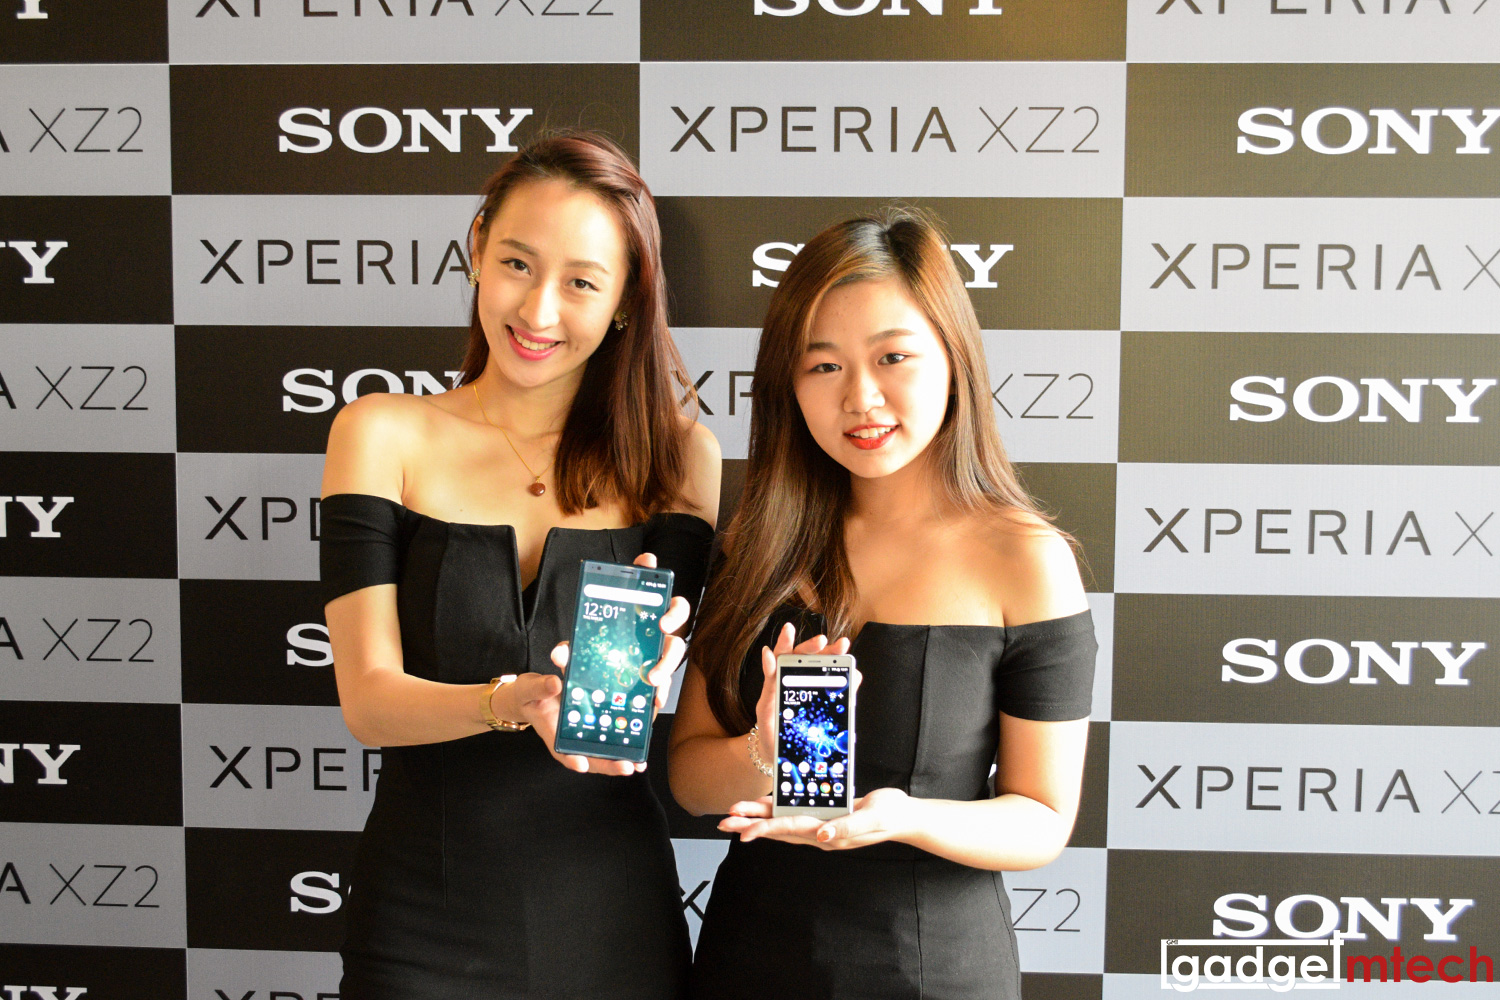 Sony Xperia XZ2 and XZ2 Compact Launched in Malaysia